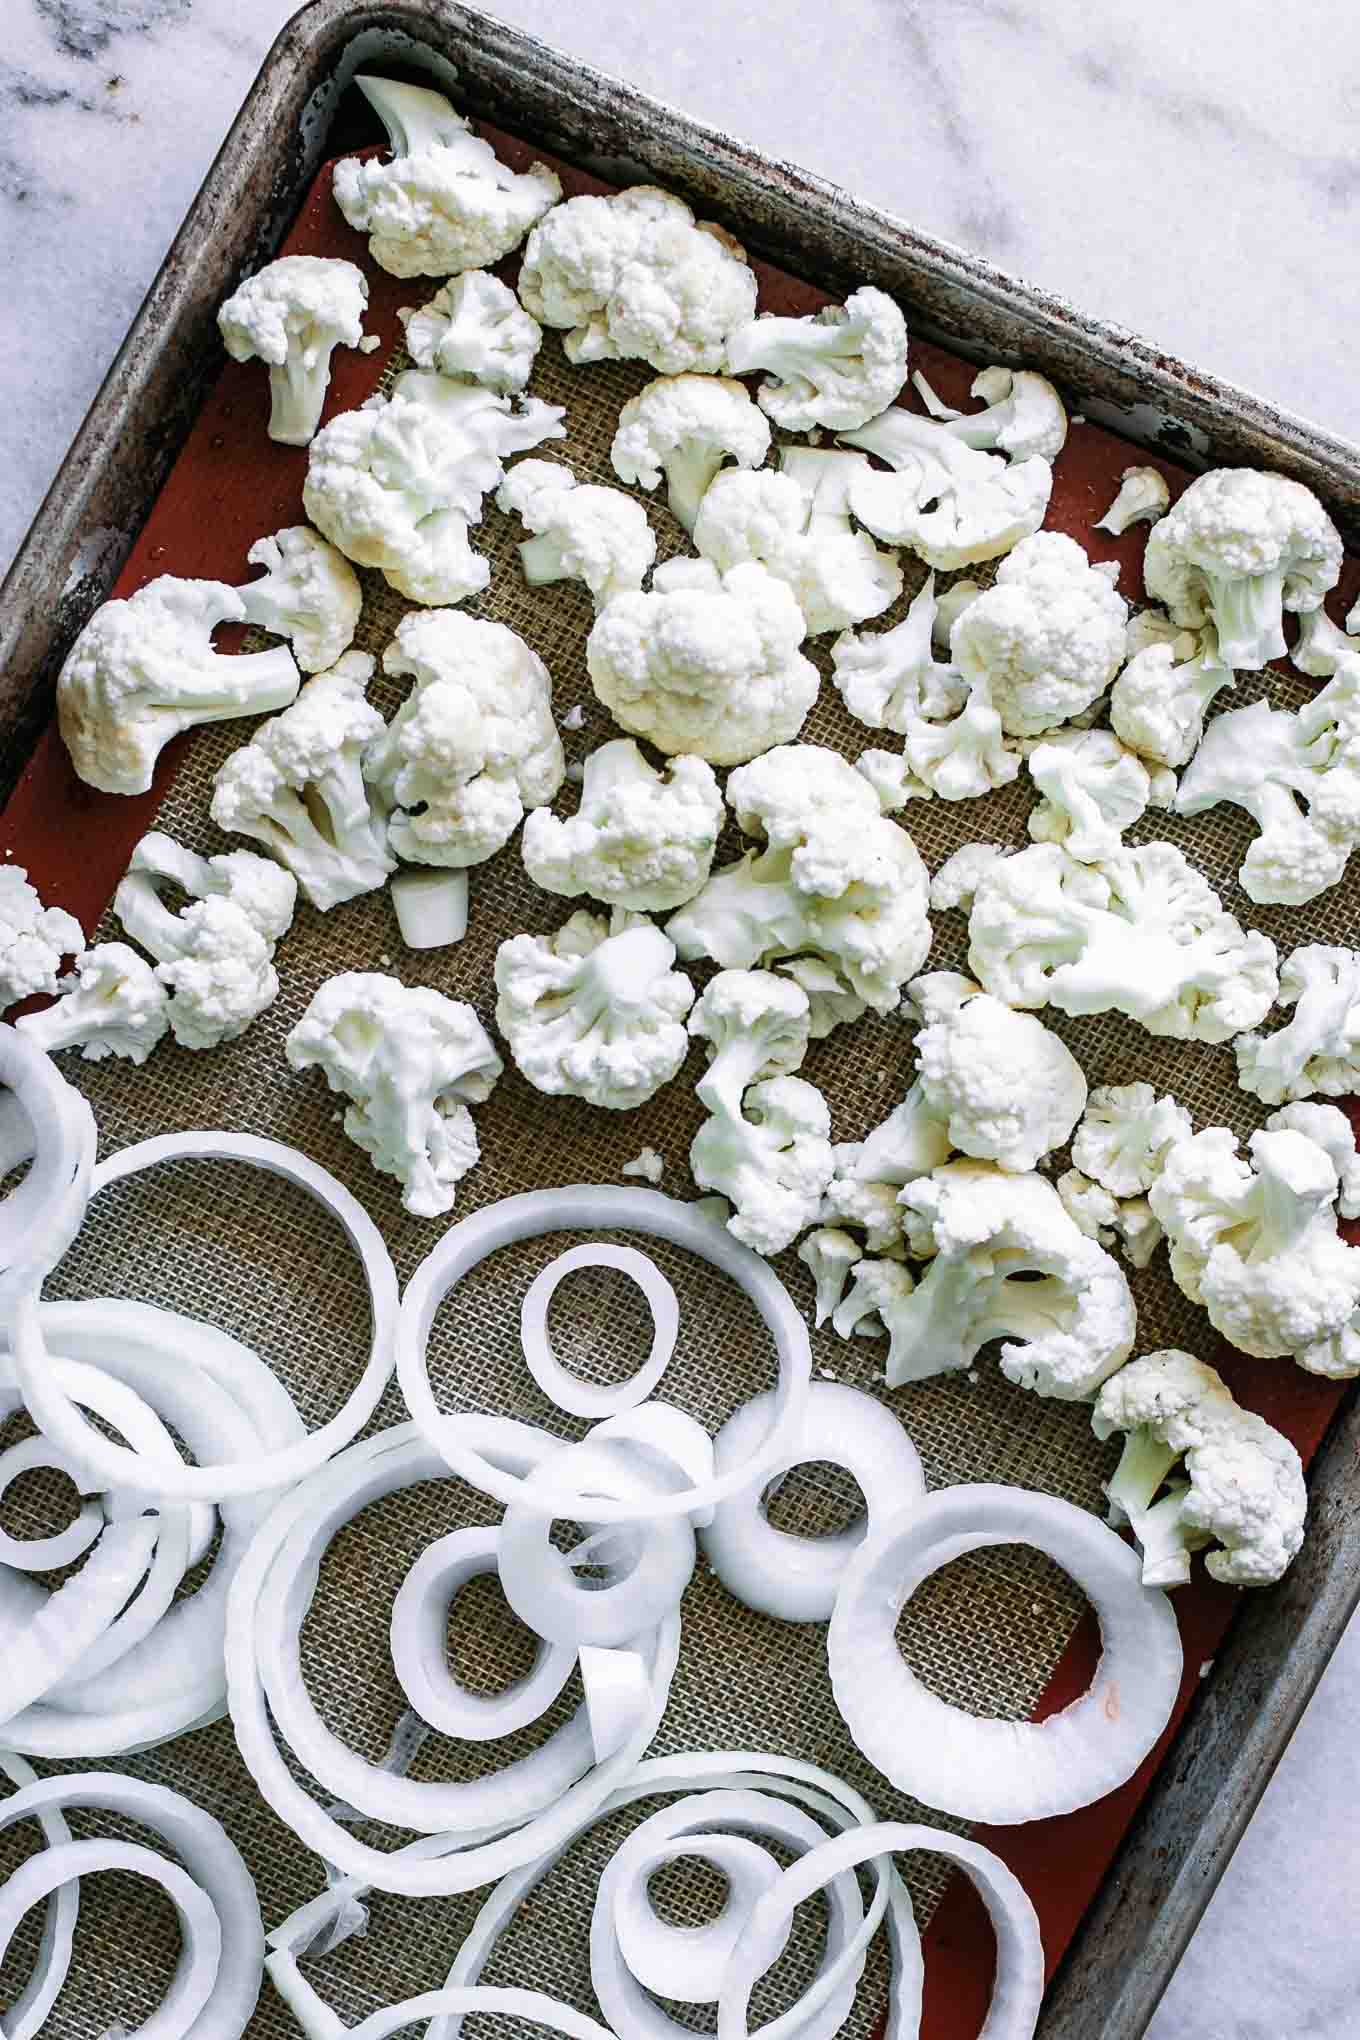 cauliflower florets and onions slices on a baking sheet before roasting